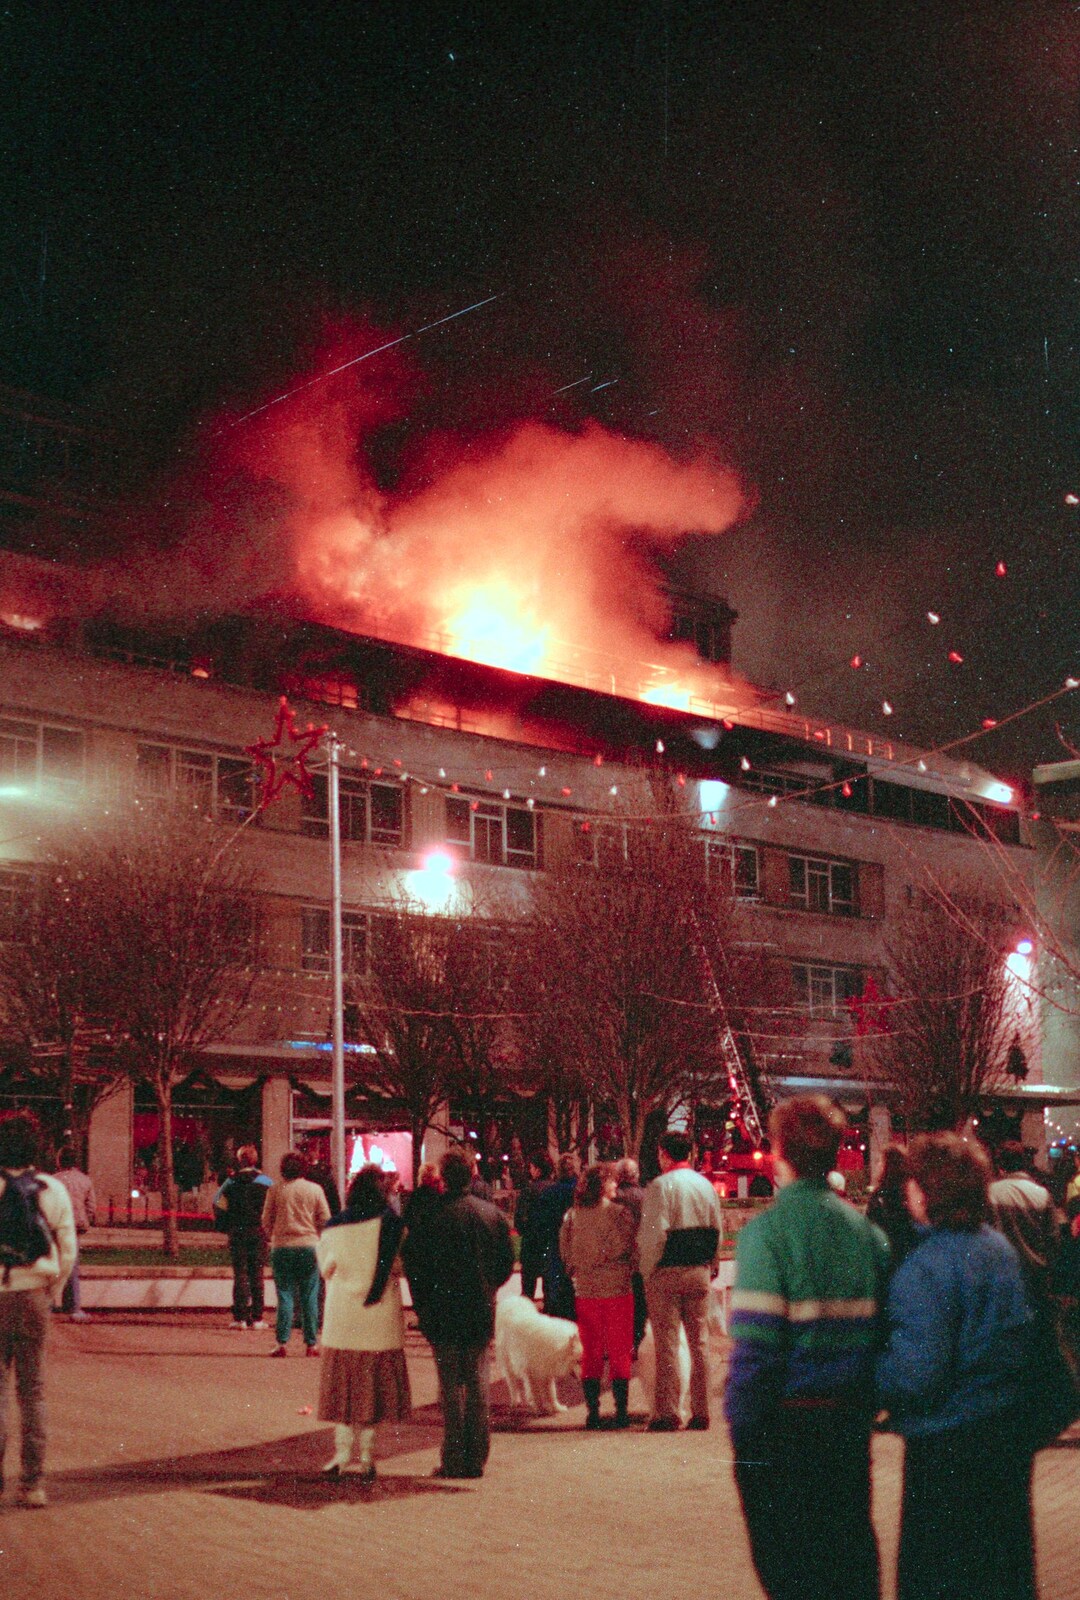 A fireball from Uni: The Fire-Bombing of Dingles, Plymouth, Devon - 19th December 1988